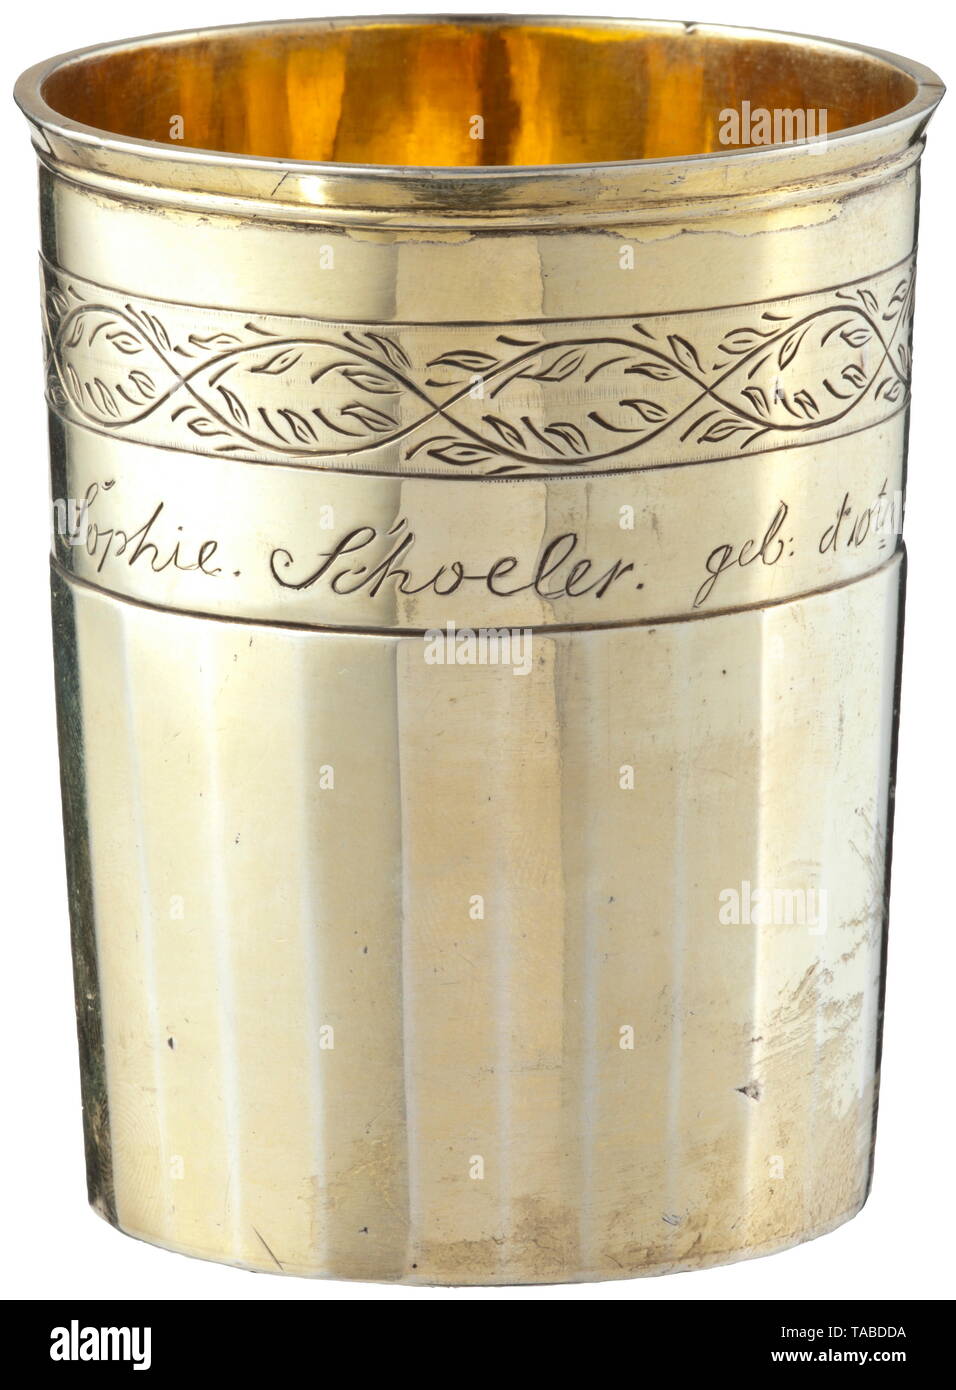 A silver cup, Viljandi, 18th century Faceted, slightly rubbed cup, the interior and exterior gold-plated, with slightly flared rim and simple tendril engraving, inscribed and dated 'Sophie Schoeler. geb. d 10ten Septbr. 1824' (tr. 'Sophie Schoeler. born 10 Sept. 1824'). The bottom engraved 'C.F. Göns. geb. d4.Juni1753 gest: d21 Juni 1830.' (tr. 'C.F. Göns. born 4 June 1753 died 21 June 1830.') and stamped with manufacturer's marks 'FG' and marks of fineness. Height 8 cm, weight 149.6 g. historic, historical, handicrafts, handcraft, craft, object,, Additional-Rights-Clearance-Info-Not-Available Stock Photo